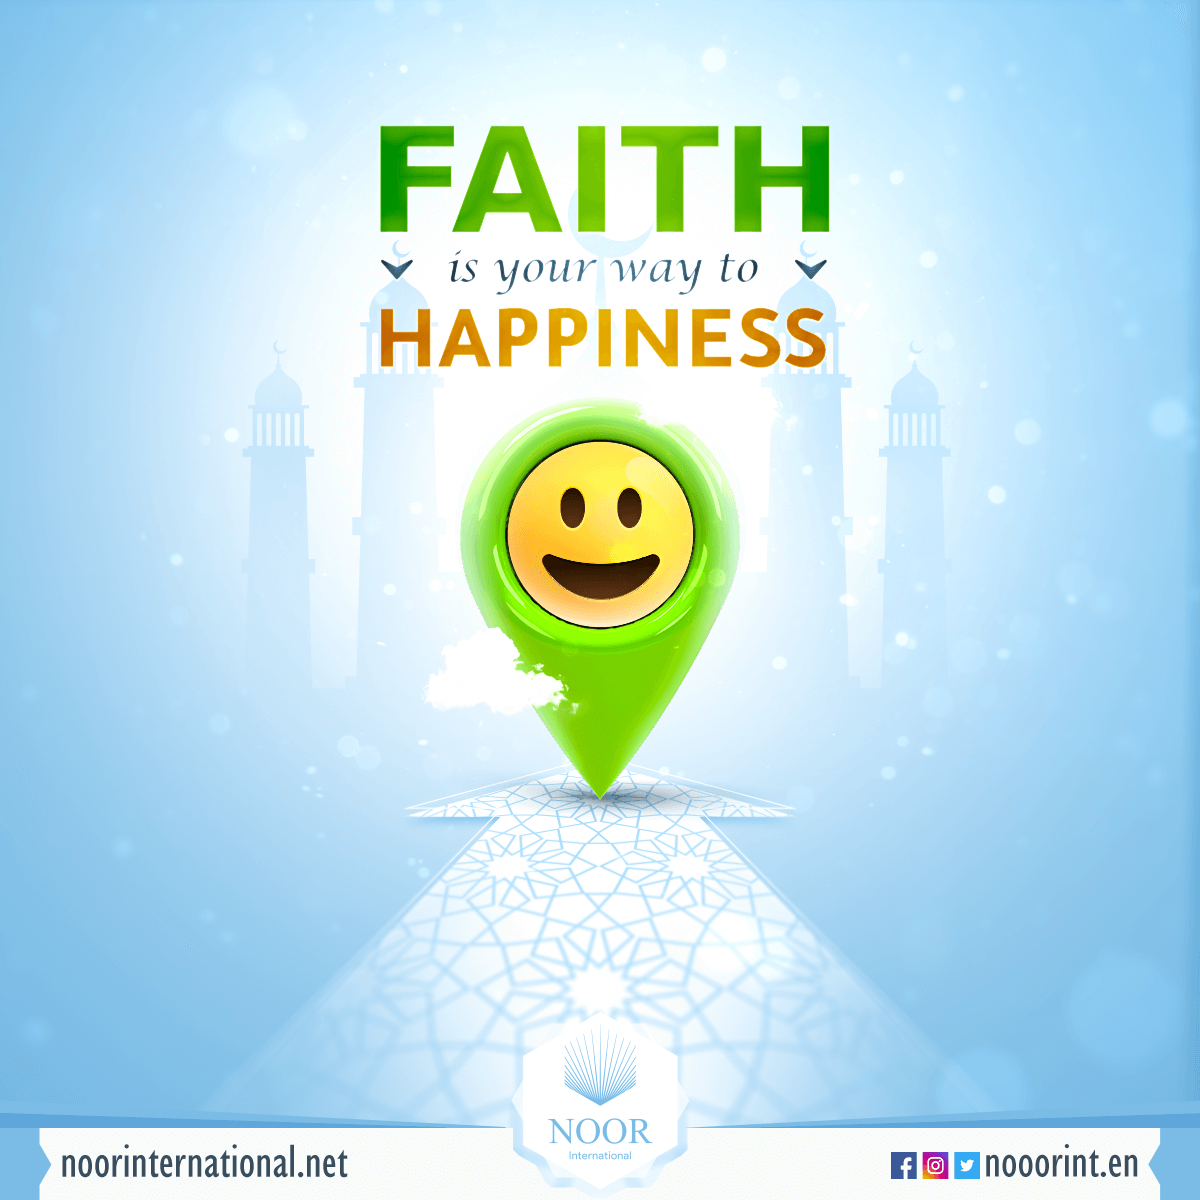 Happiness in the Qur'an